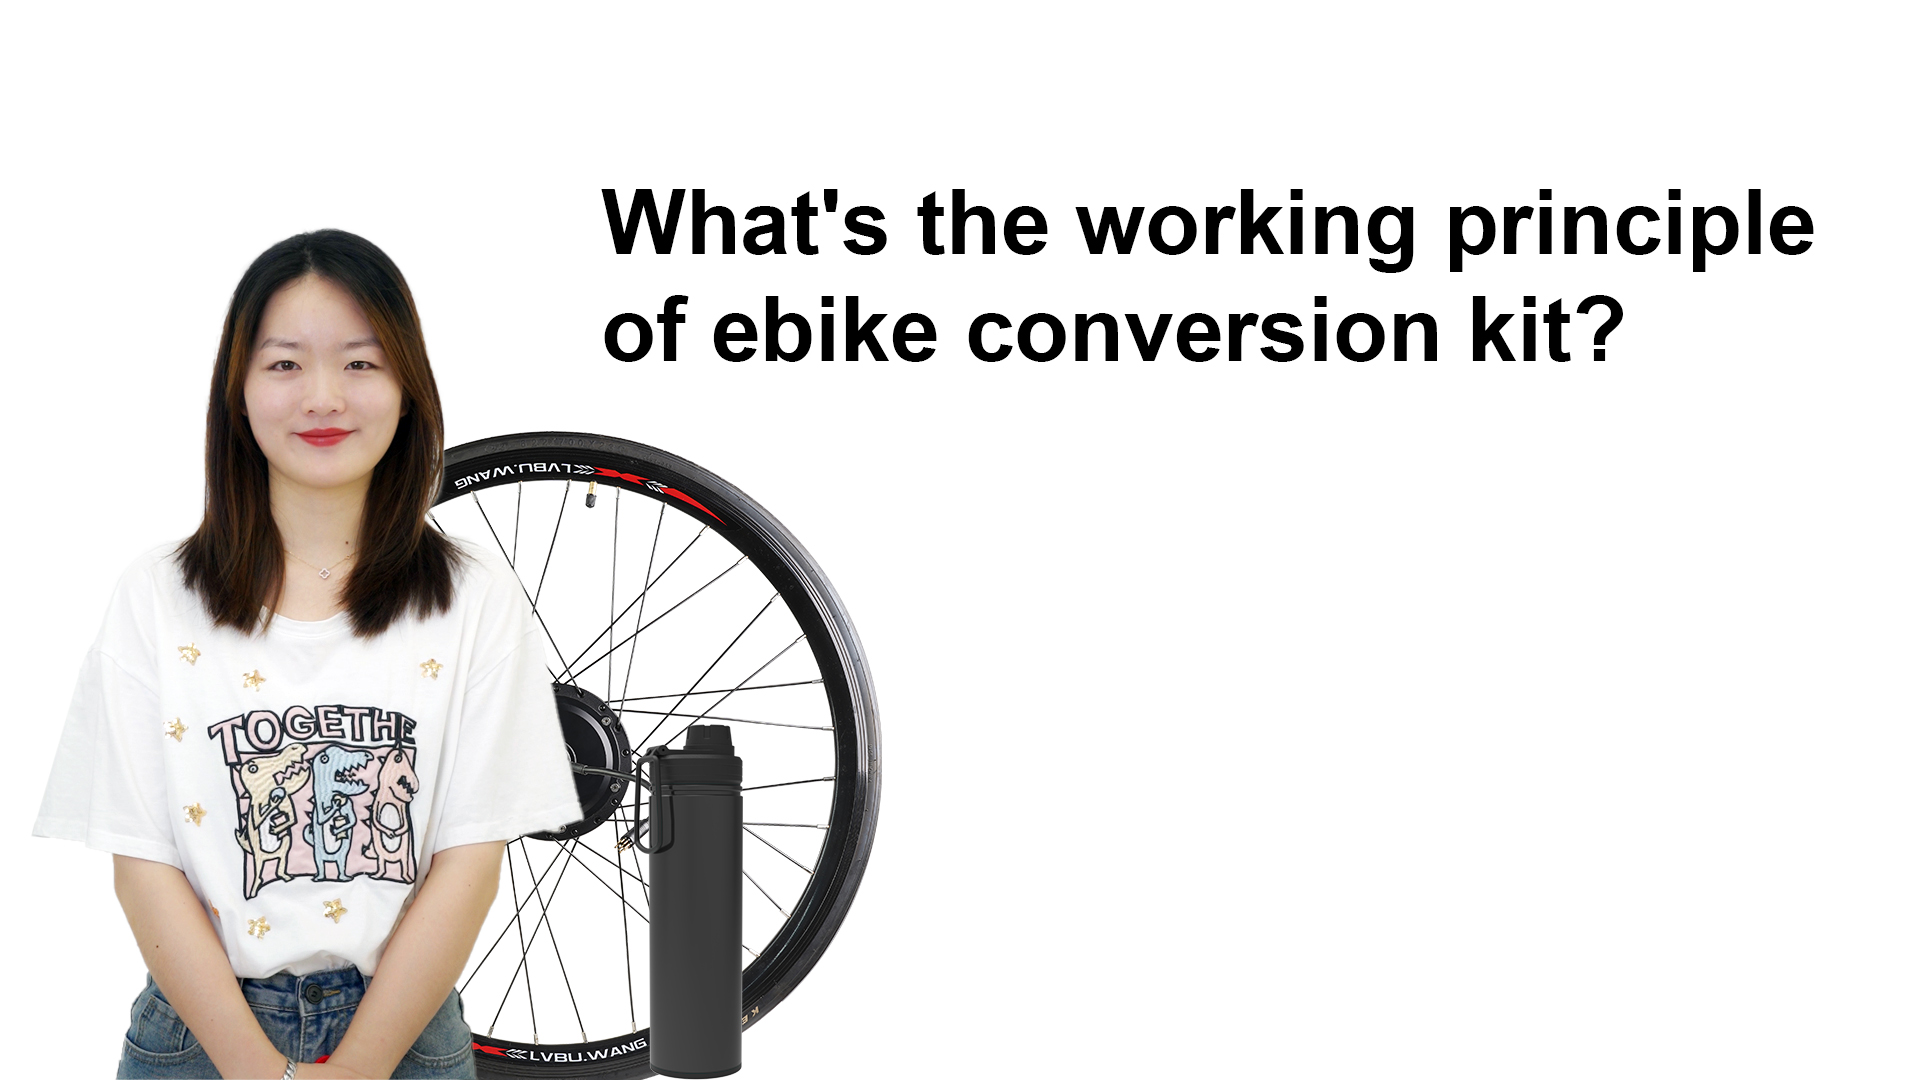 What's the working principle of ebike conversion kit?